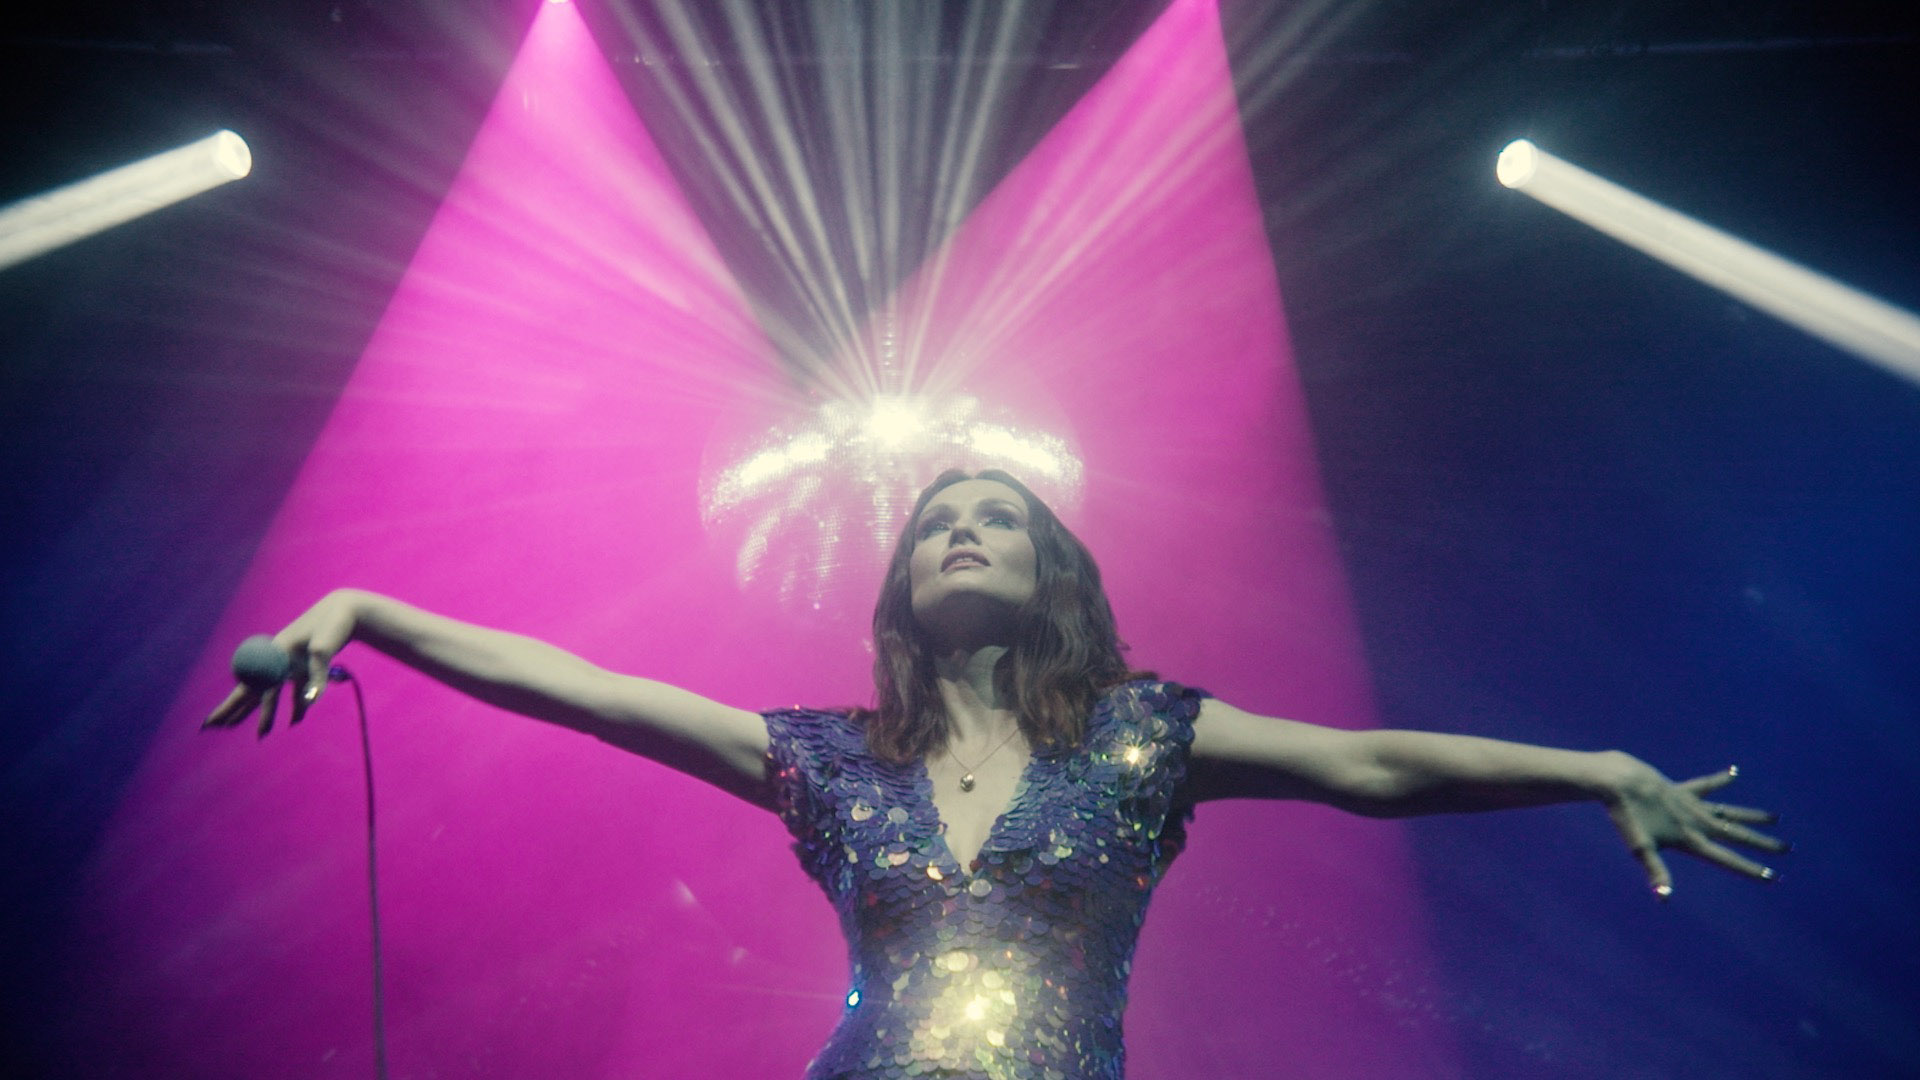 SOPHIE ELLIS-BEXTOR shares video for new single 'Crying at the Discotheque' 